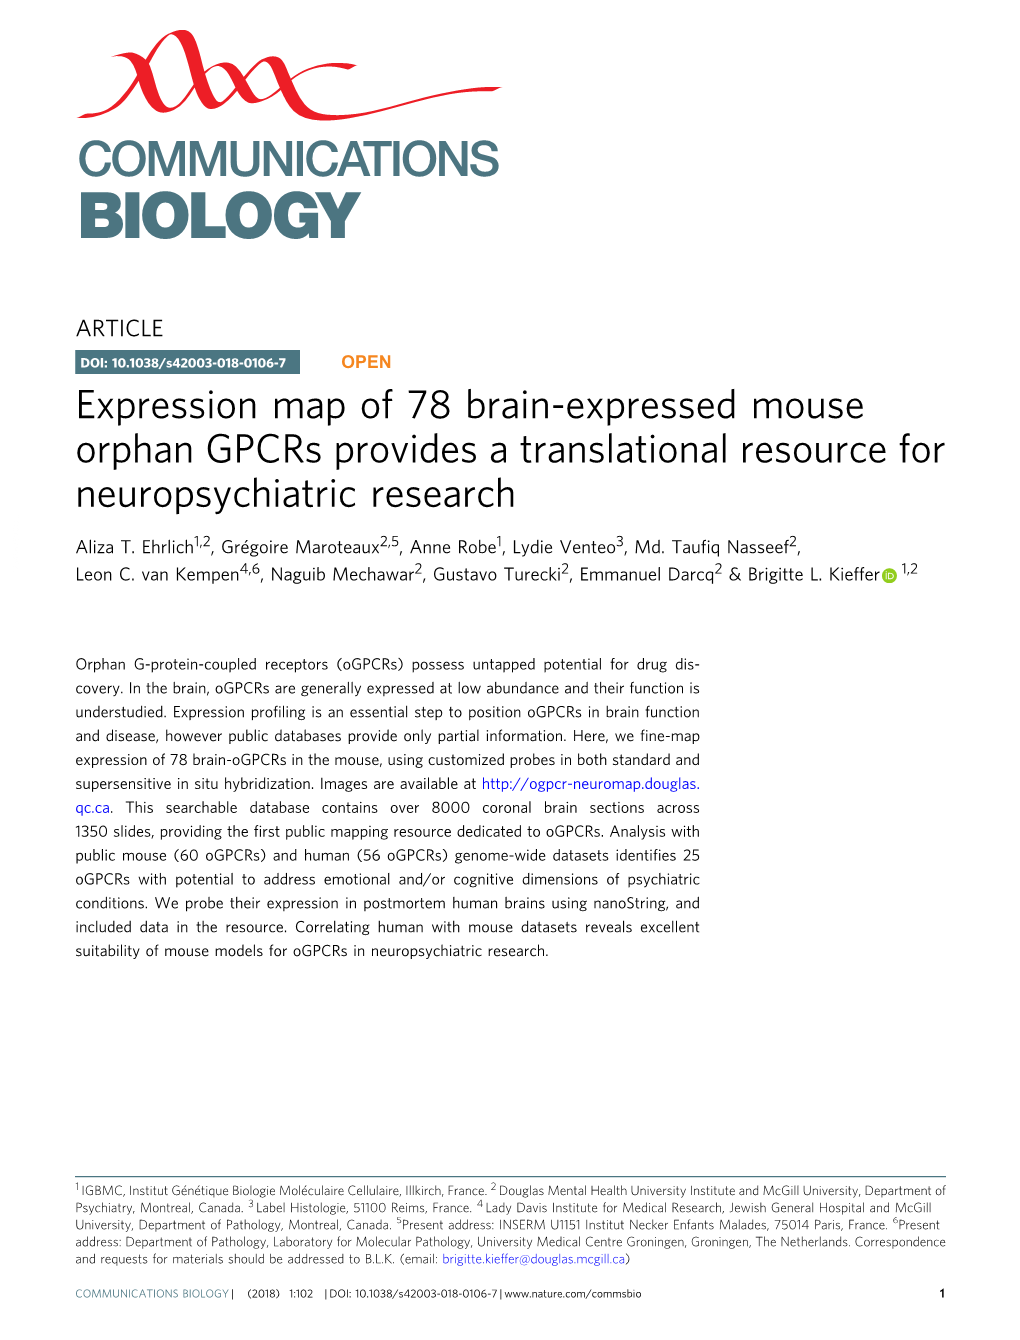 Expression Map of 78 Brain-Expressed Mouse Orphan Gpcrs Provides a Translational Resource for Neuropsychiatric Research